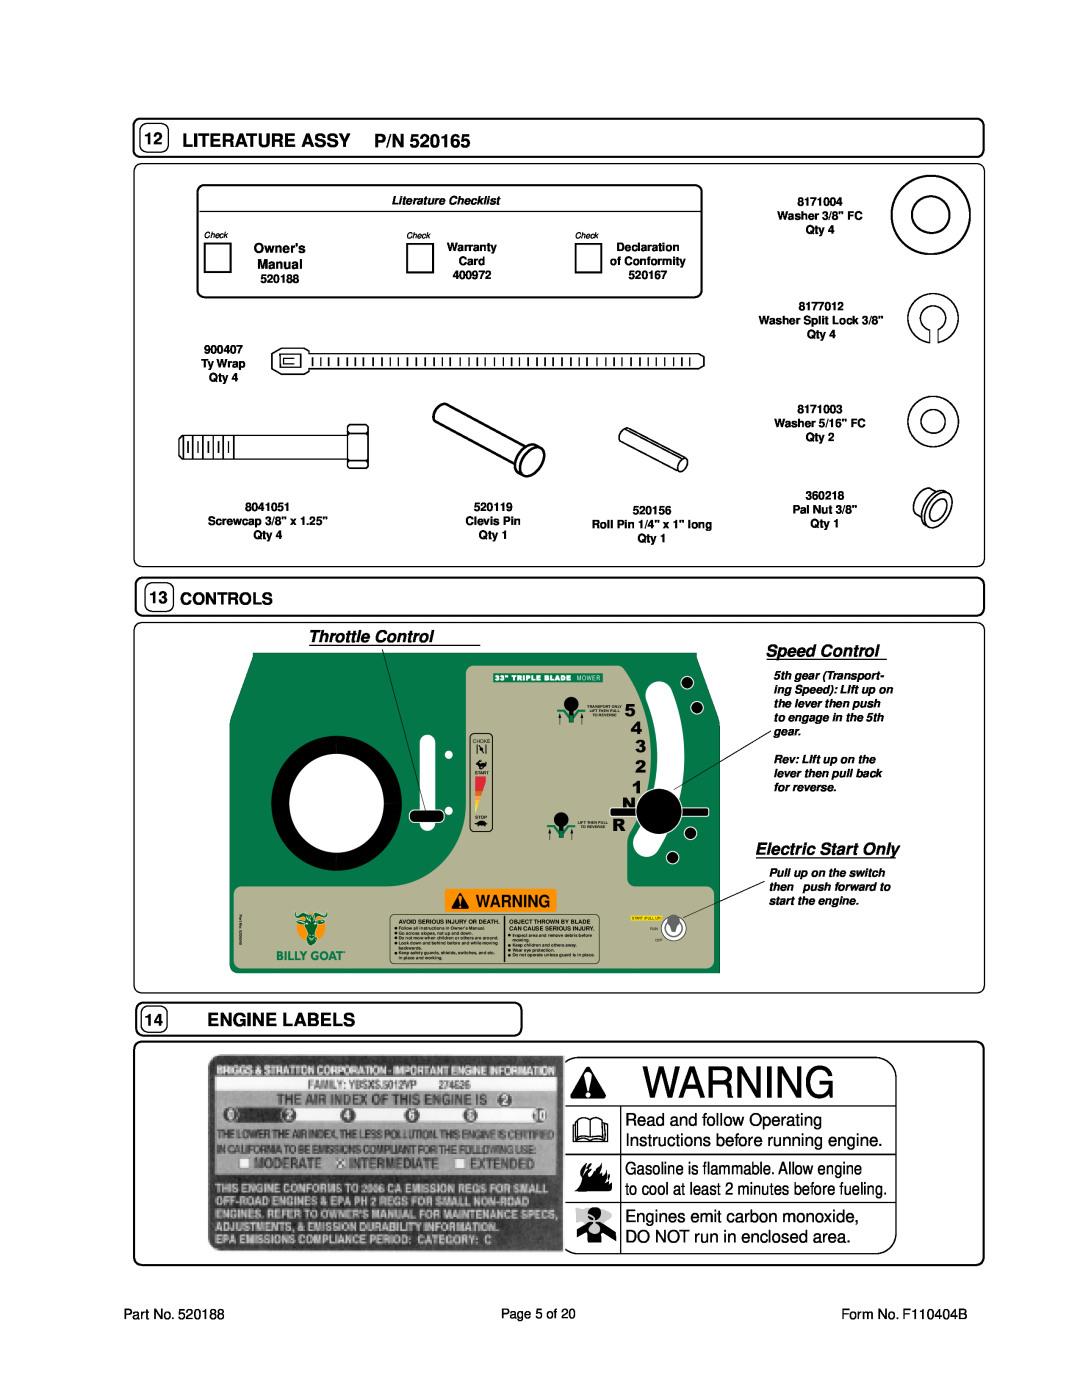 Billy Goat FM3301IN, FM3301INE Engine Labels, Read and follow Operating Instructions before running engine, 8171004 